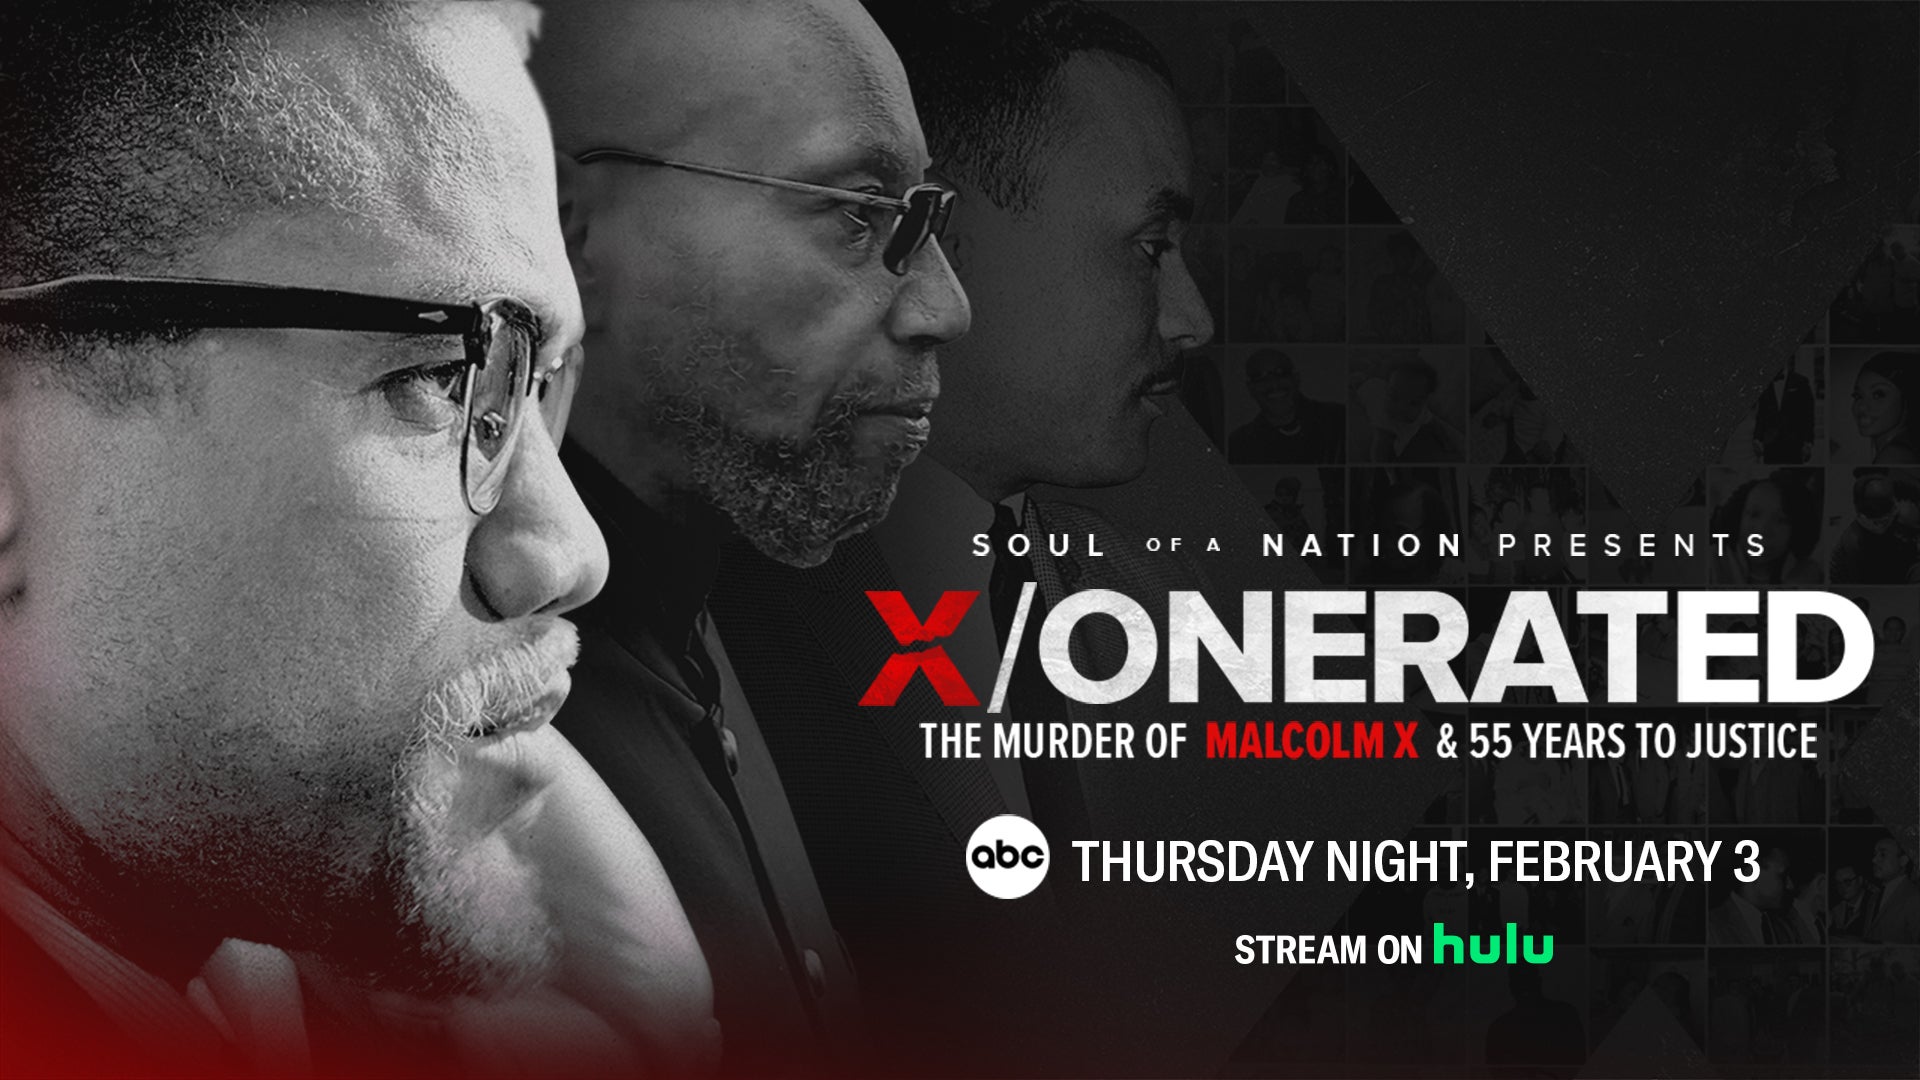 A Man Wrongfully Convicted Of Killing Malcolm X Will Give His First TV Interview In ABC News Special, “X/onerated”